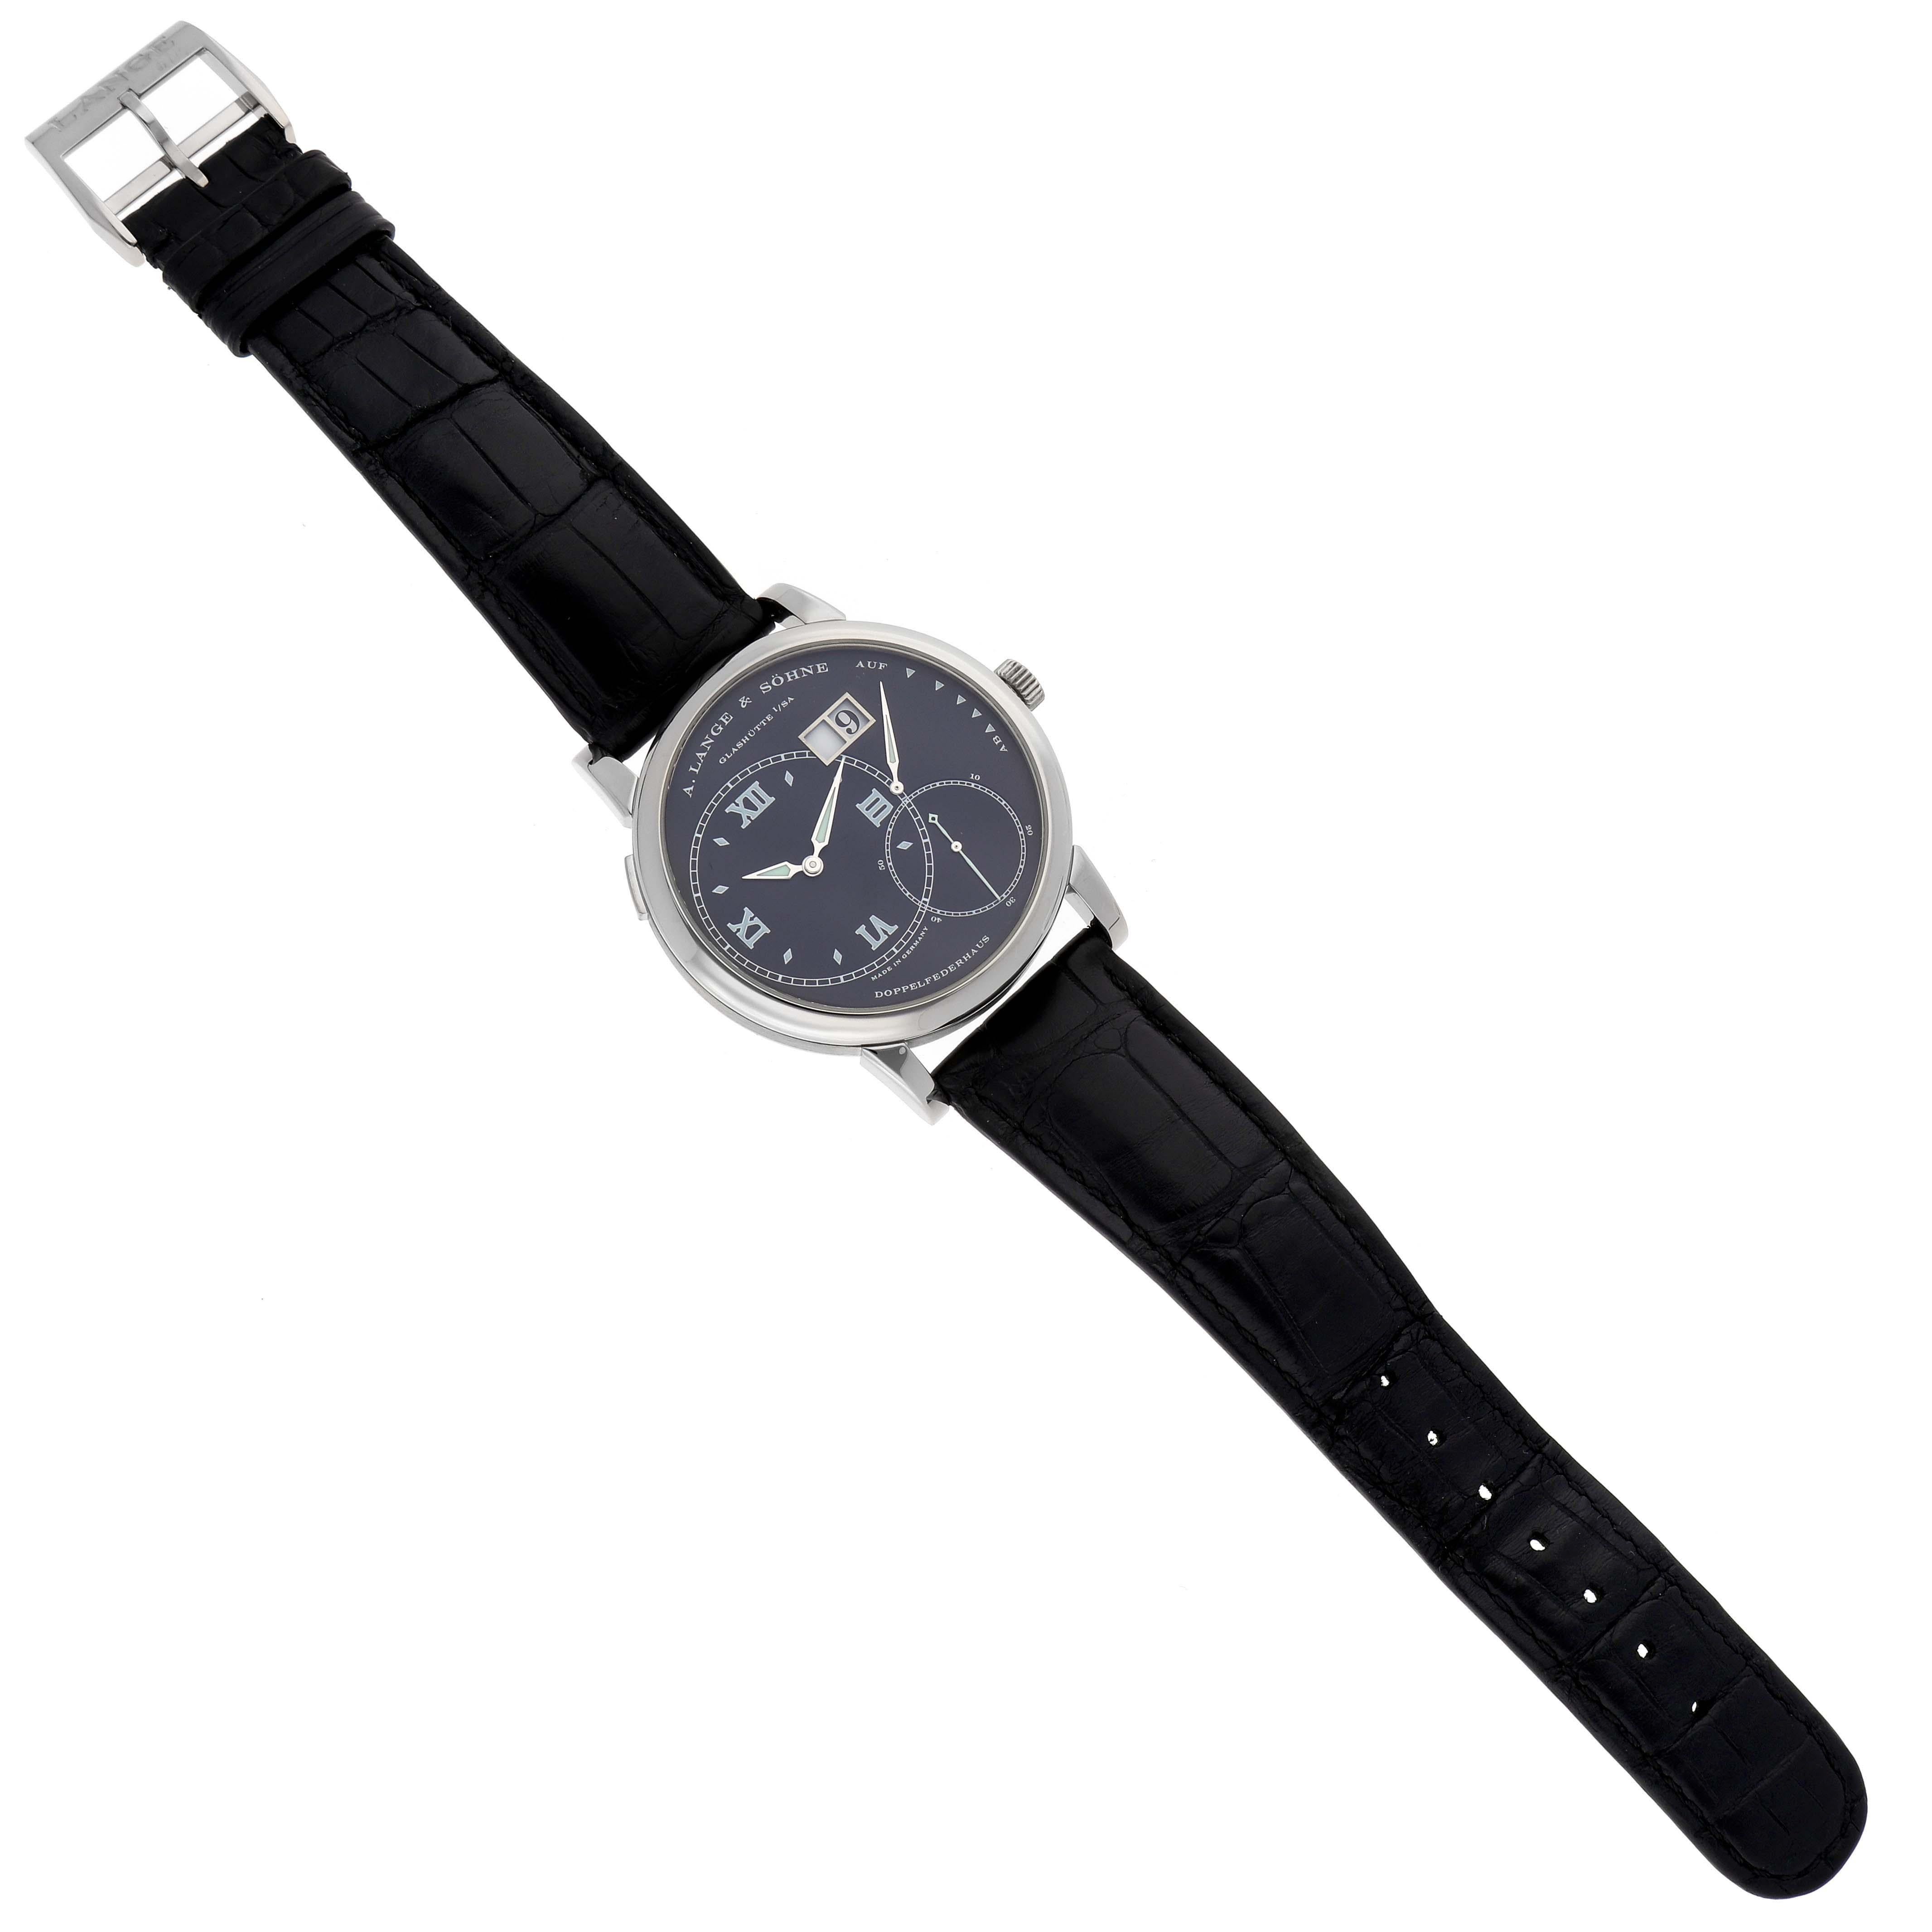 A. Lange & Sohne Grand Lange 1 White Gold Black Dial Mens Watch 115.028. Manual-winding movement. 18k white gold case 41.9 mm in diameter. Exhibition transparent sapphire crystal case back. Quick date-correction button located on the side of the